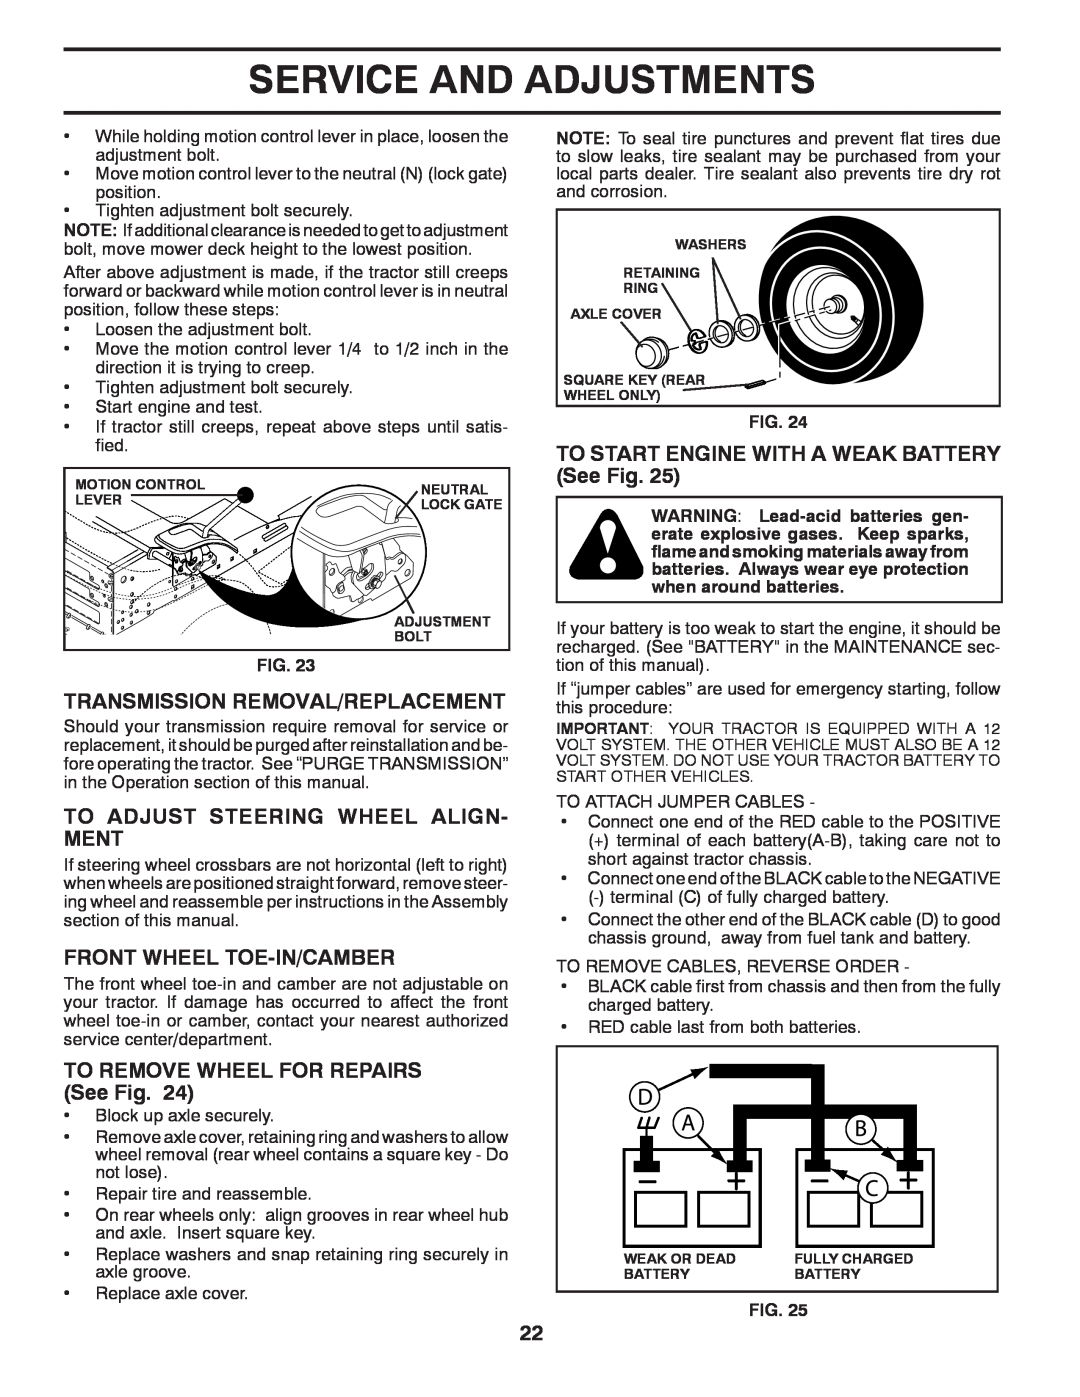 Poulan 419450 manual Transmission Removal/Replacement, To Adjust Steering Wheel Align- Ment, Front Wheel Toe-In/Camber 